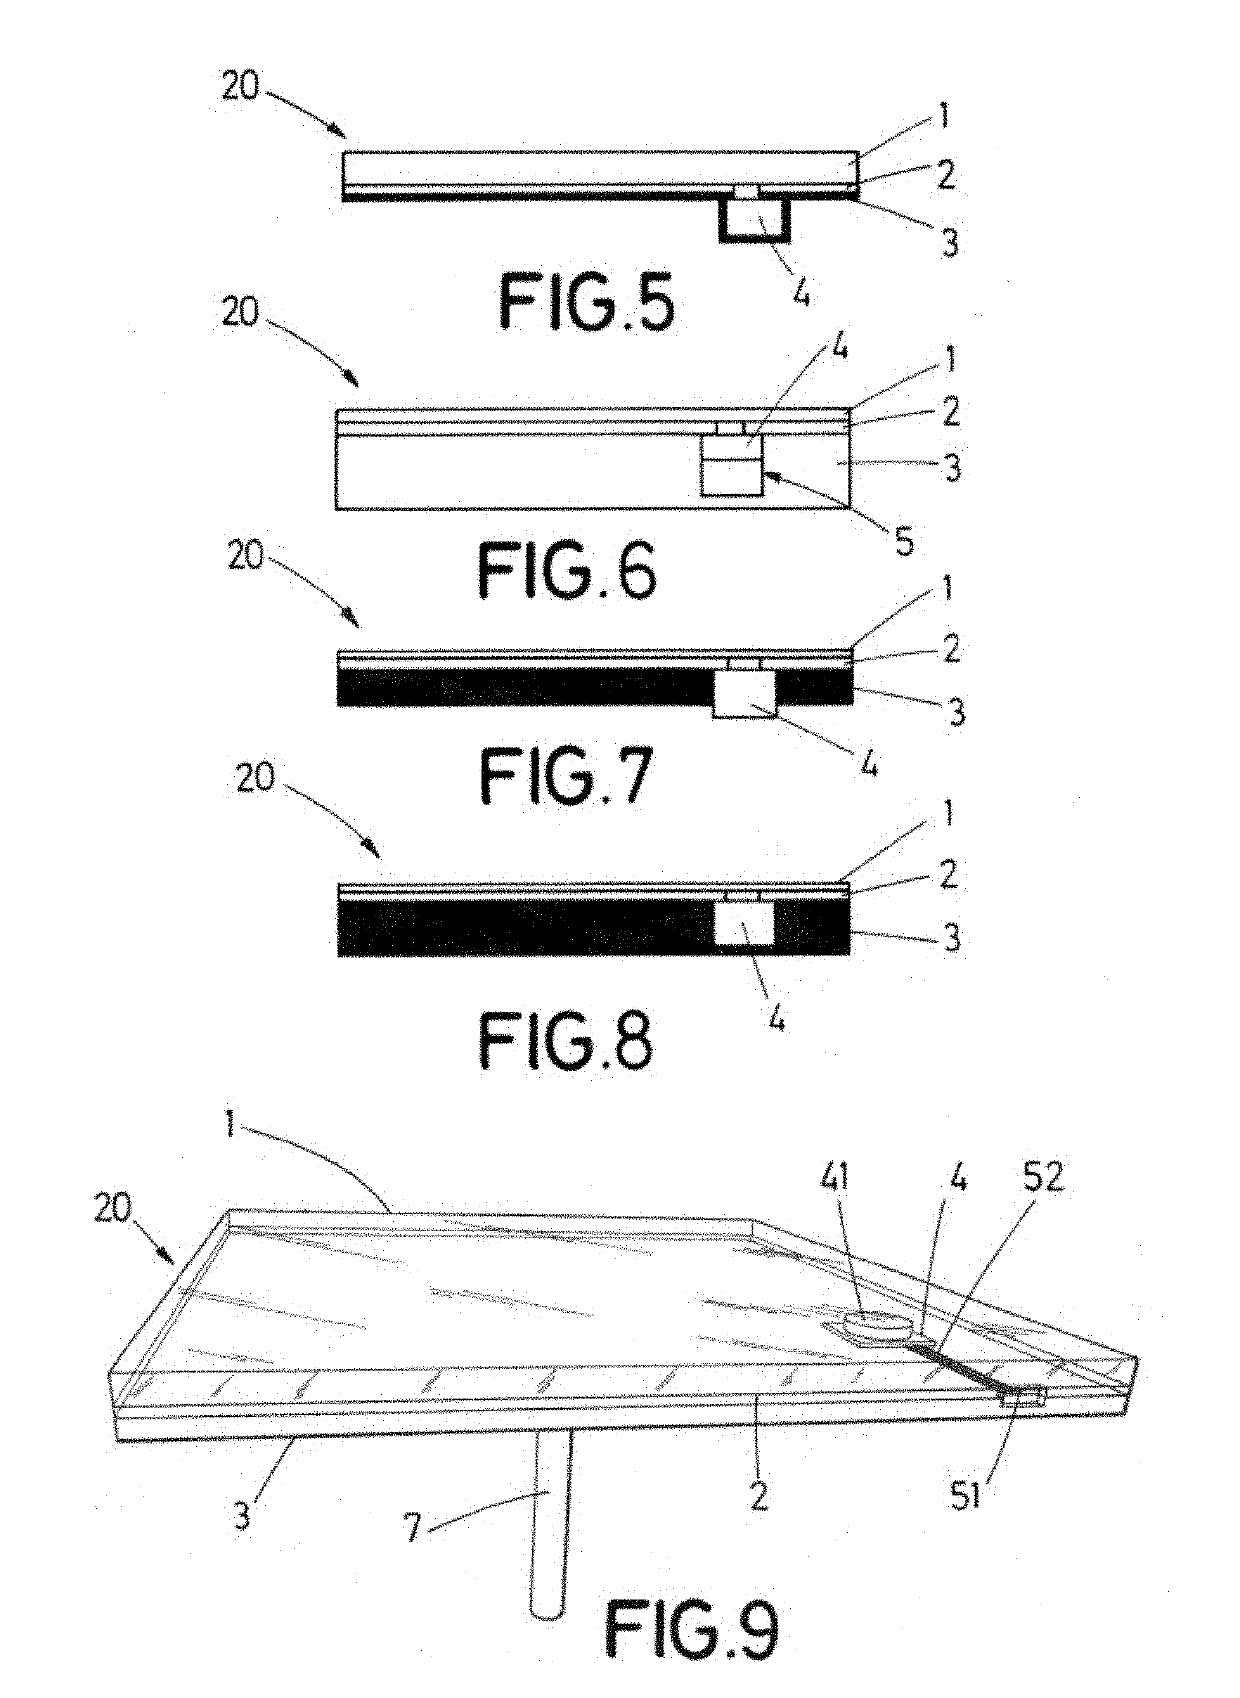 Mirror for a solar reflector, method of mirror assembly and management system in a solar field